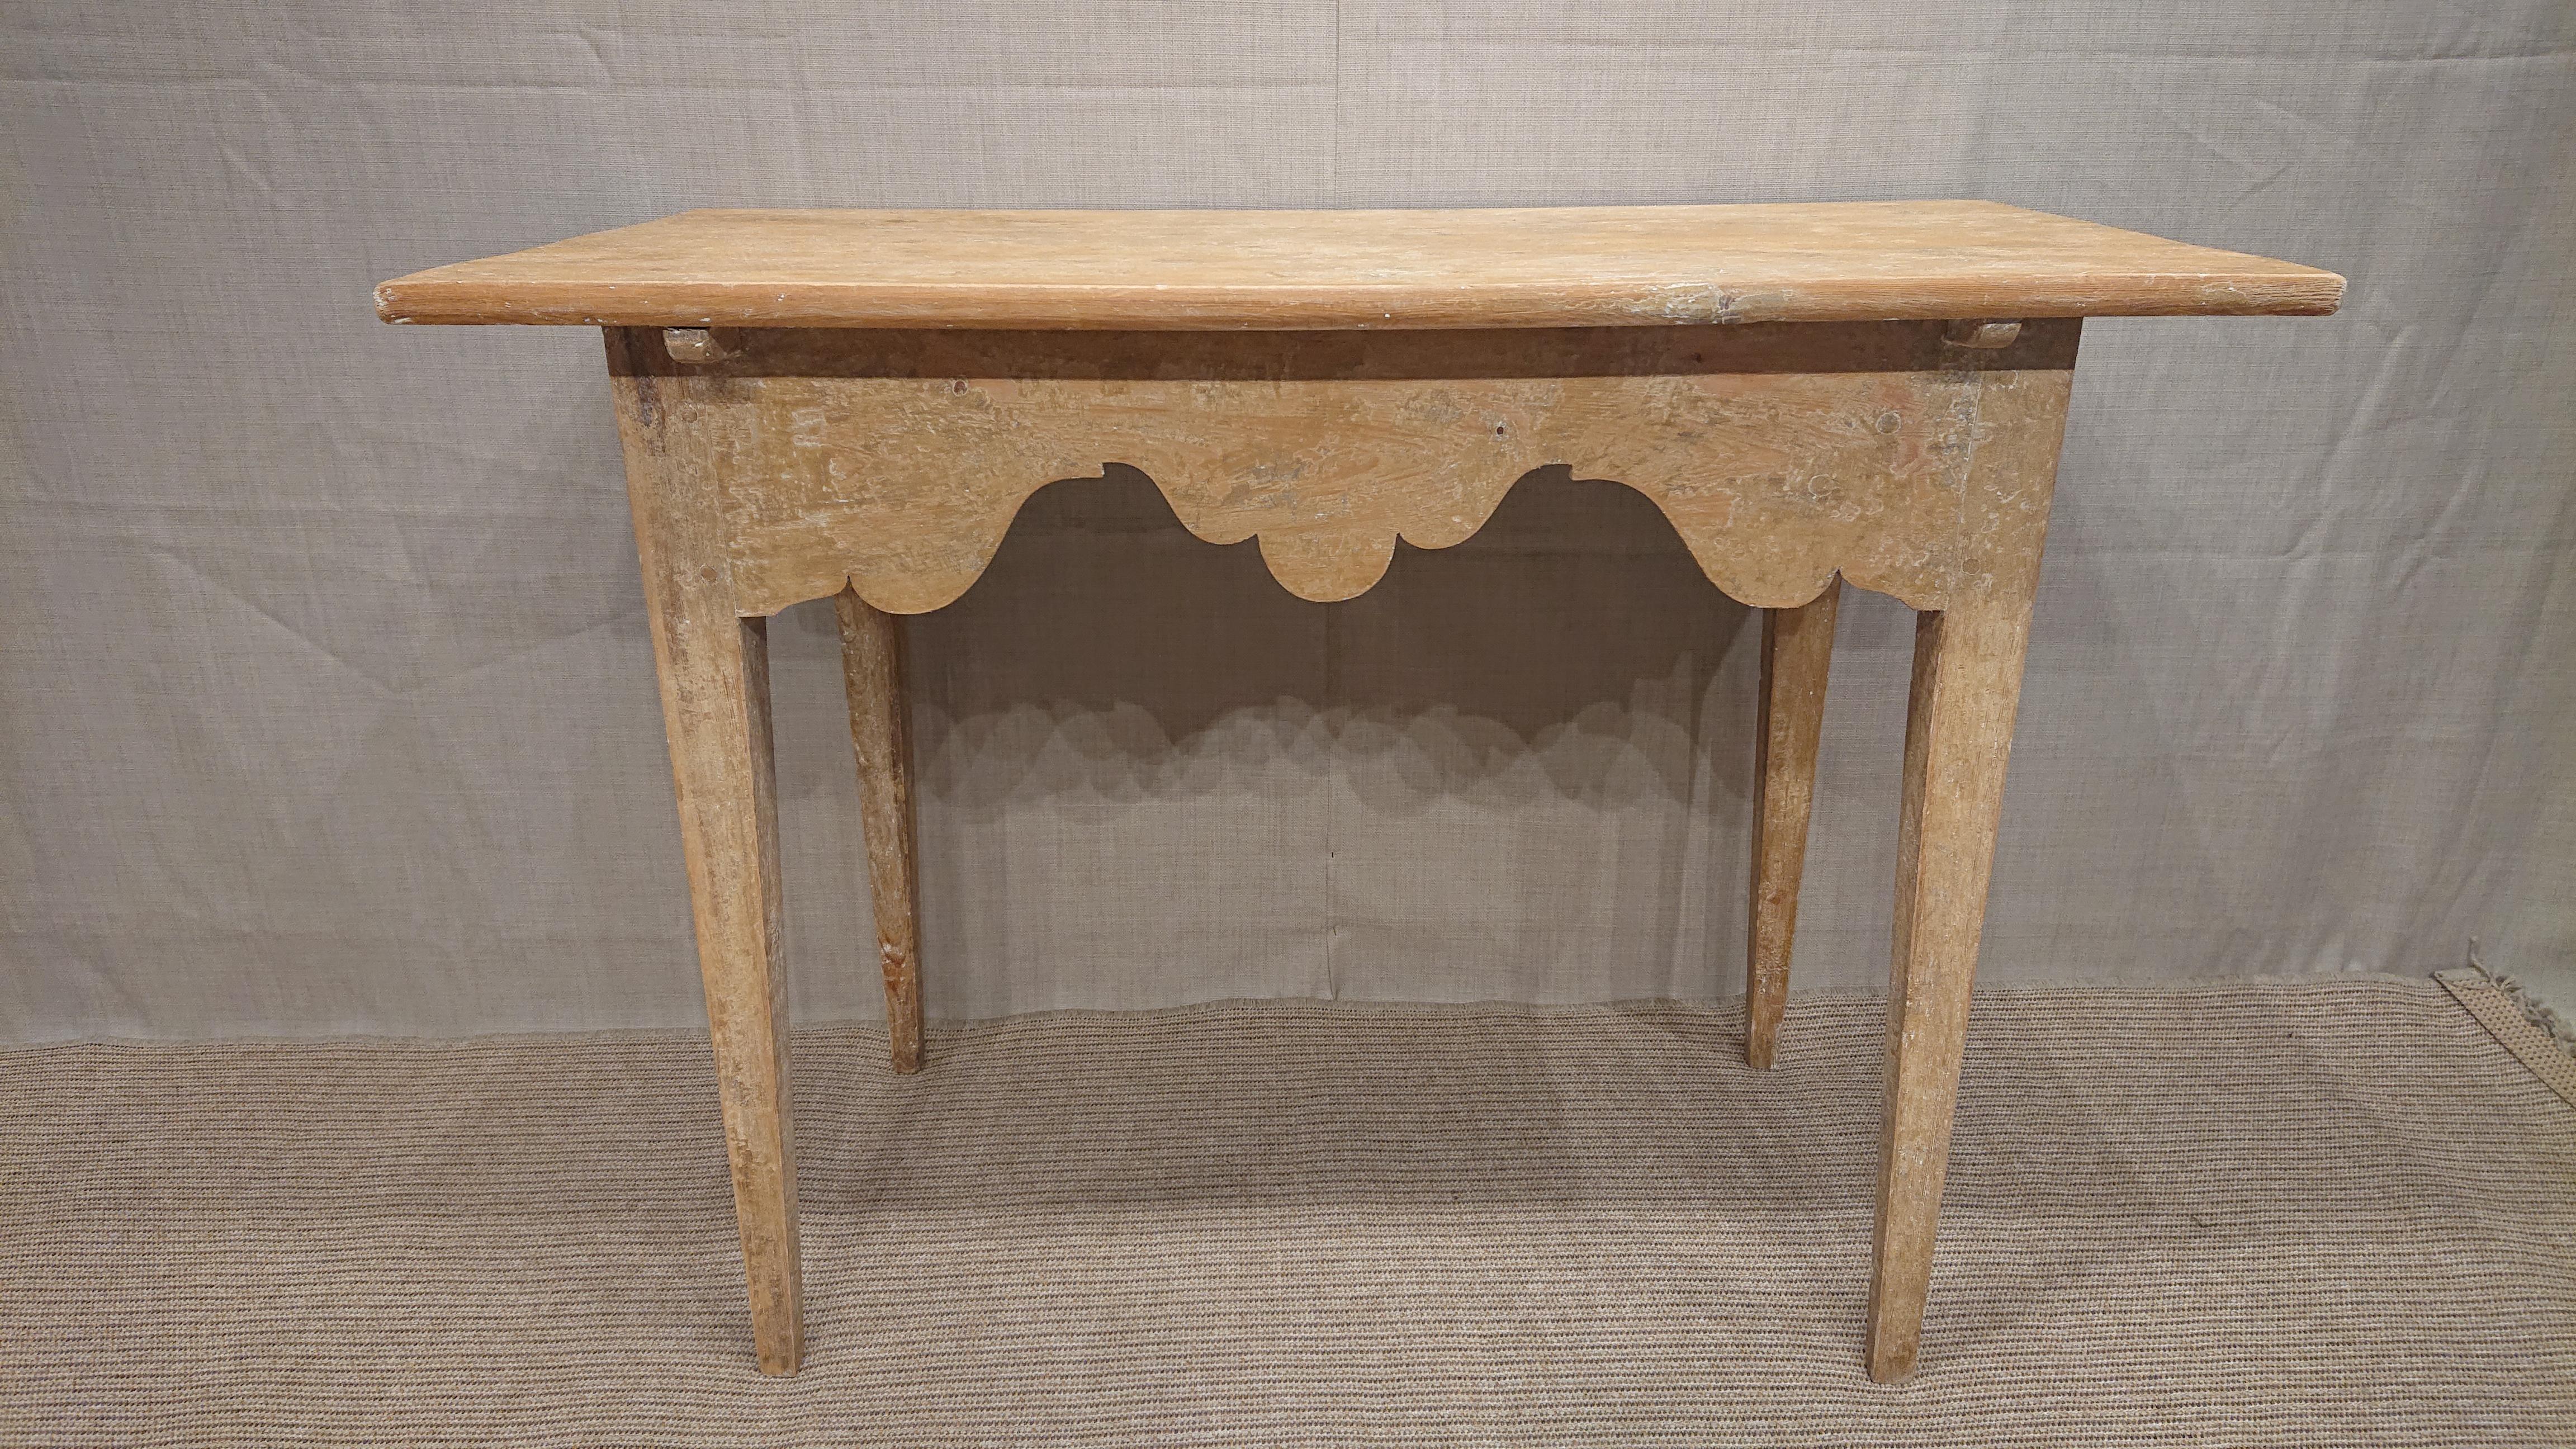 19th Century Swedish console table with trace of originalpaint.
A beautiful & lovely table.
Nicely curved edge around the entire table.
Neat & stable in construction.
Nice to set independently.
Later dating during one of the repaintings in